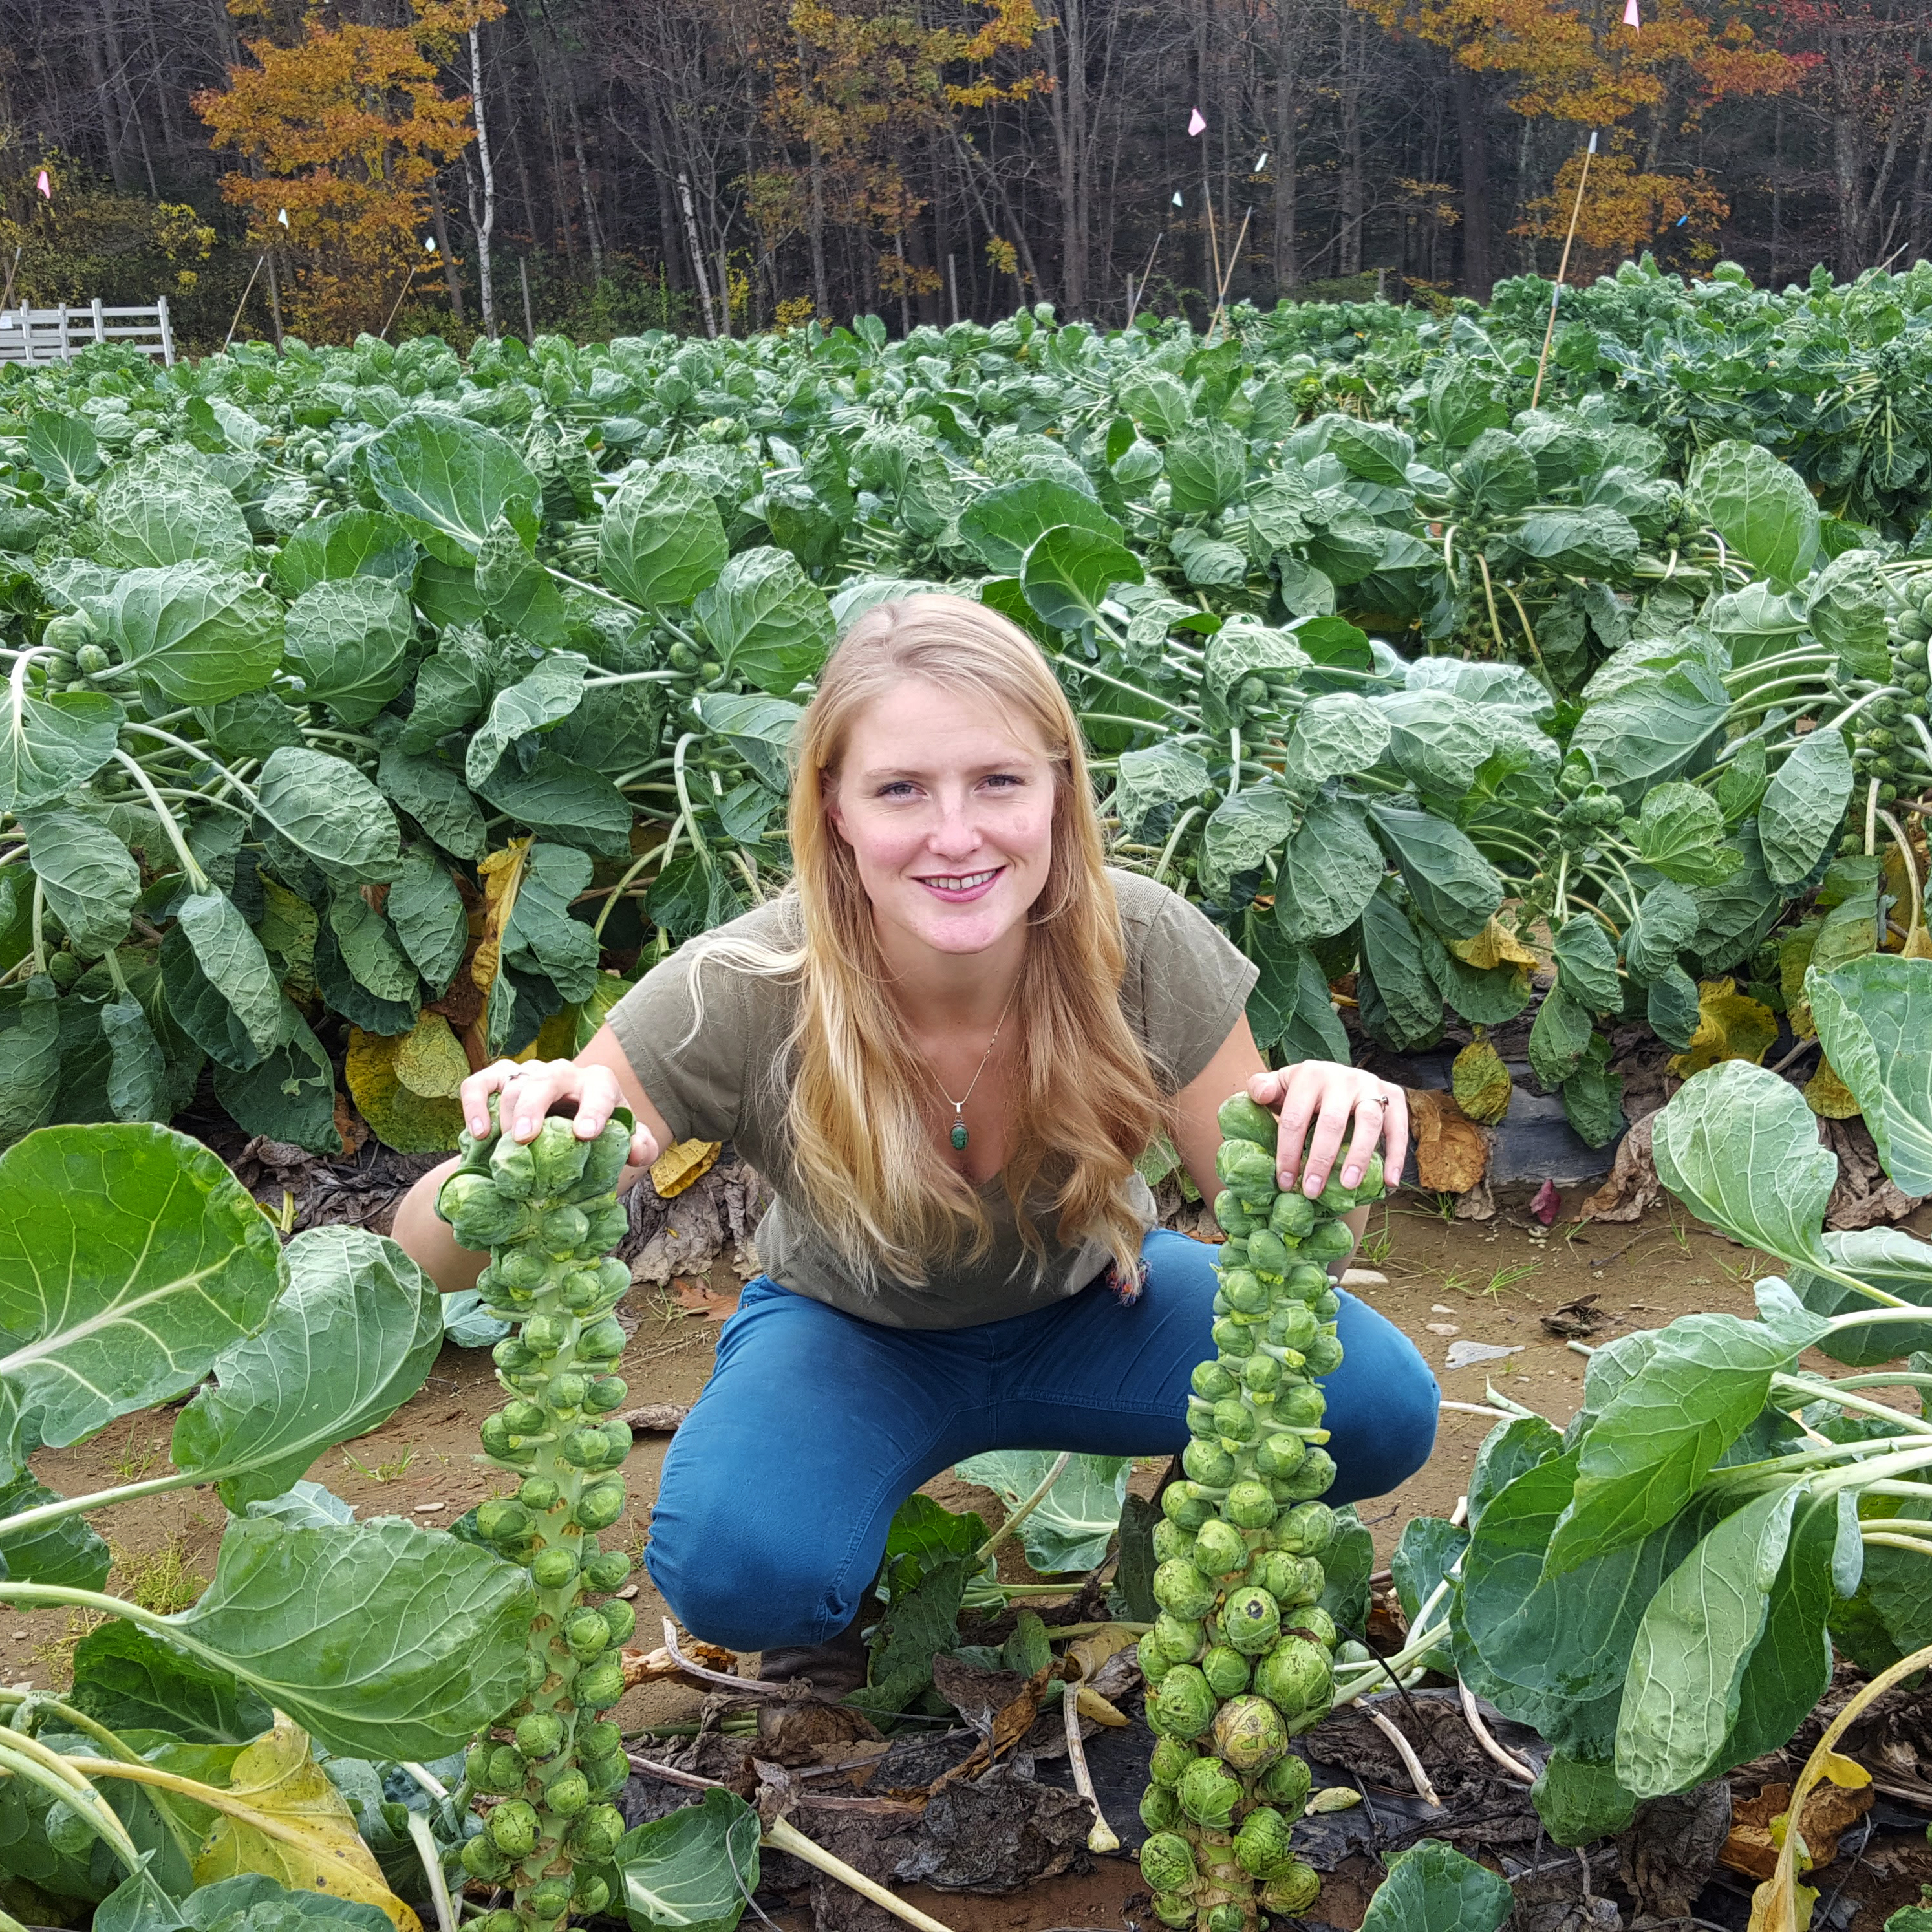 A woman crouches in a field of verdant vegetables, holding two large Brussels sprout stalks.